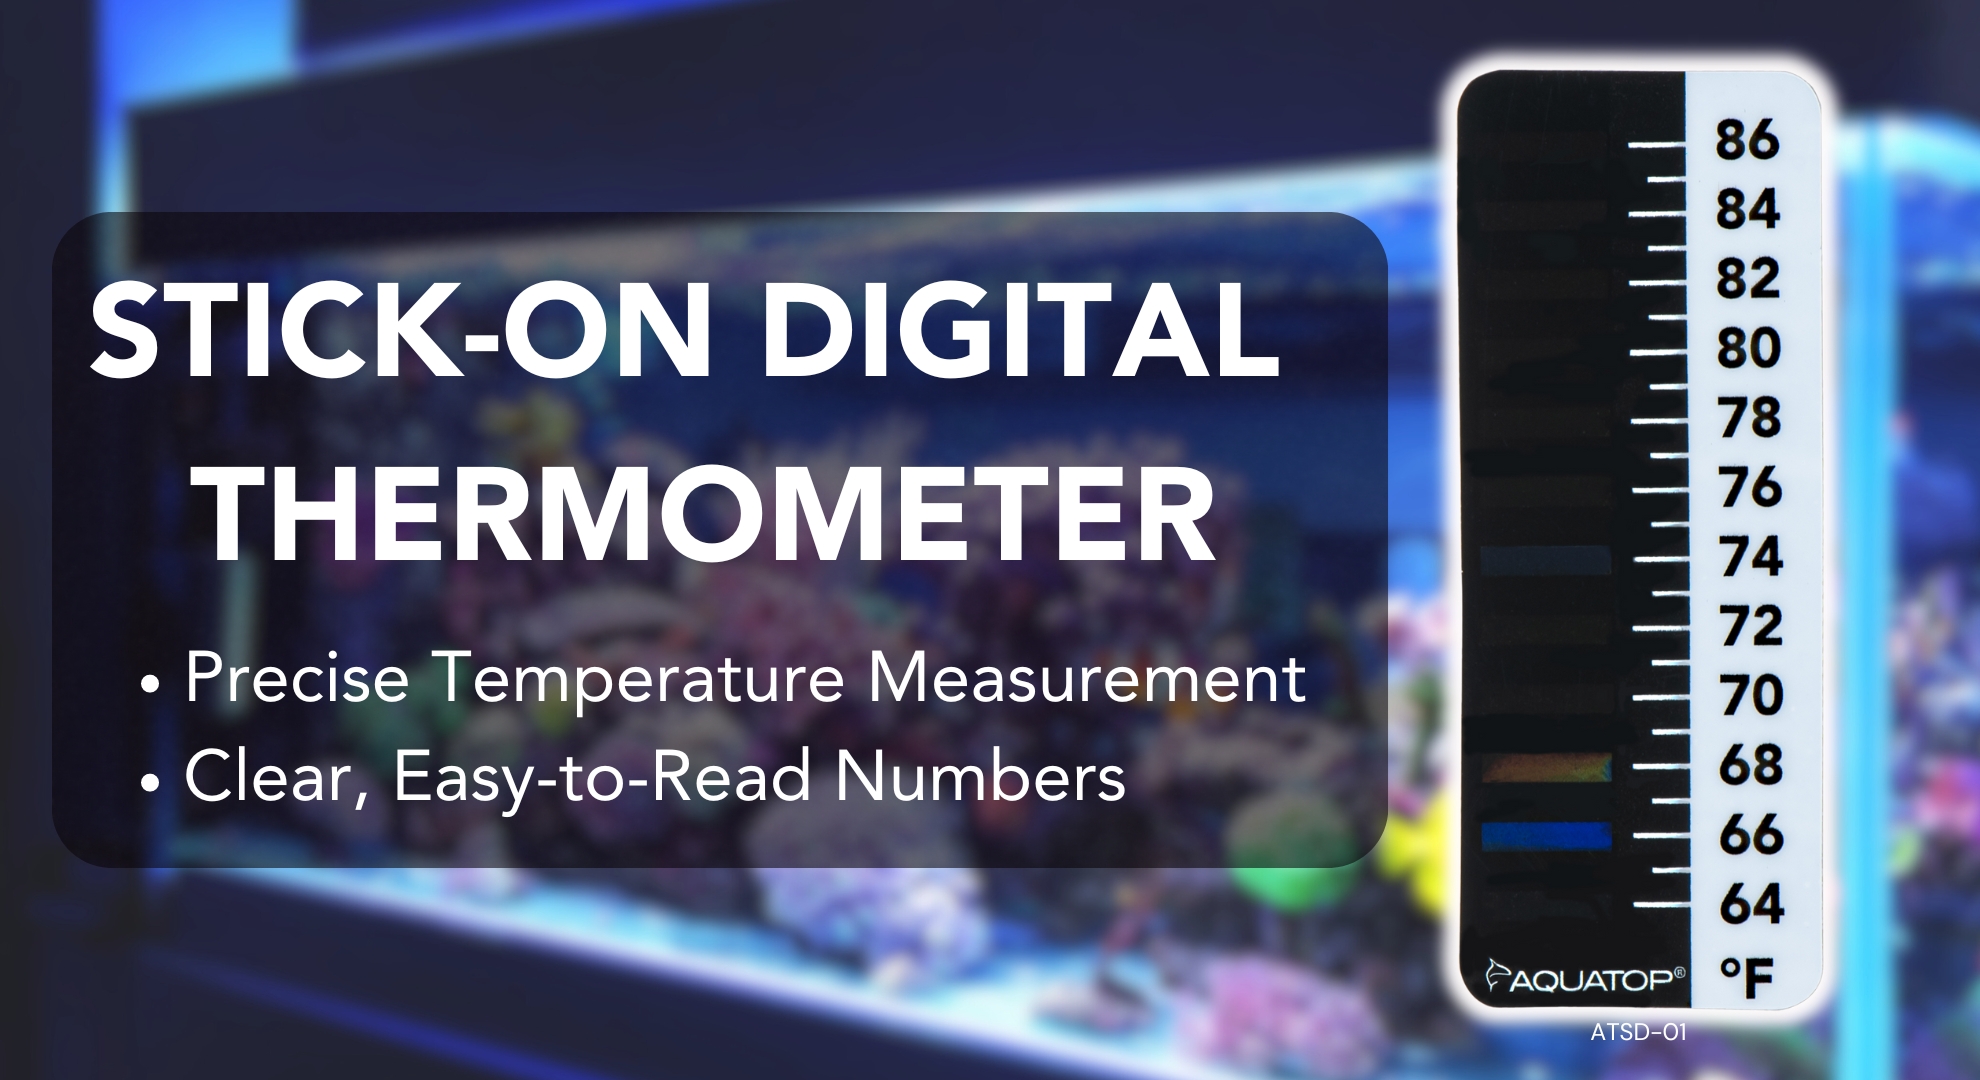 Aquatop Stick-On Digital Thermometer: Precise Temperature Monitoring for Your Tank